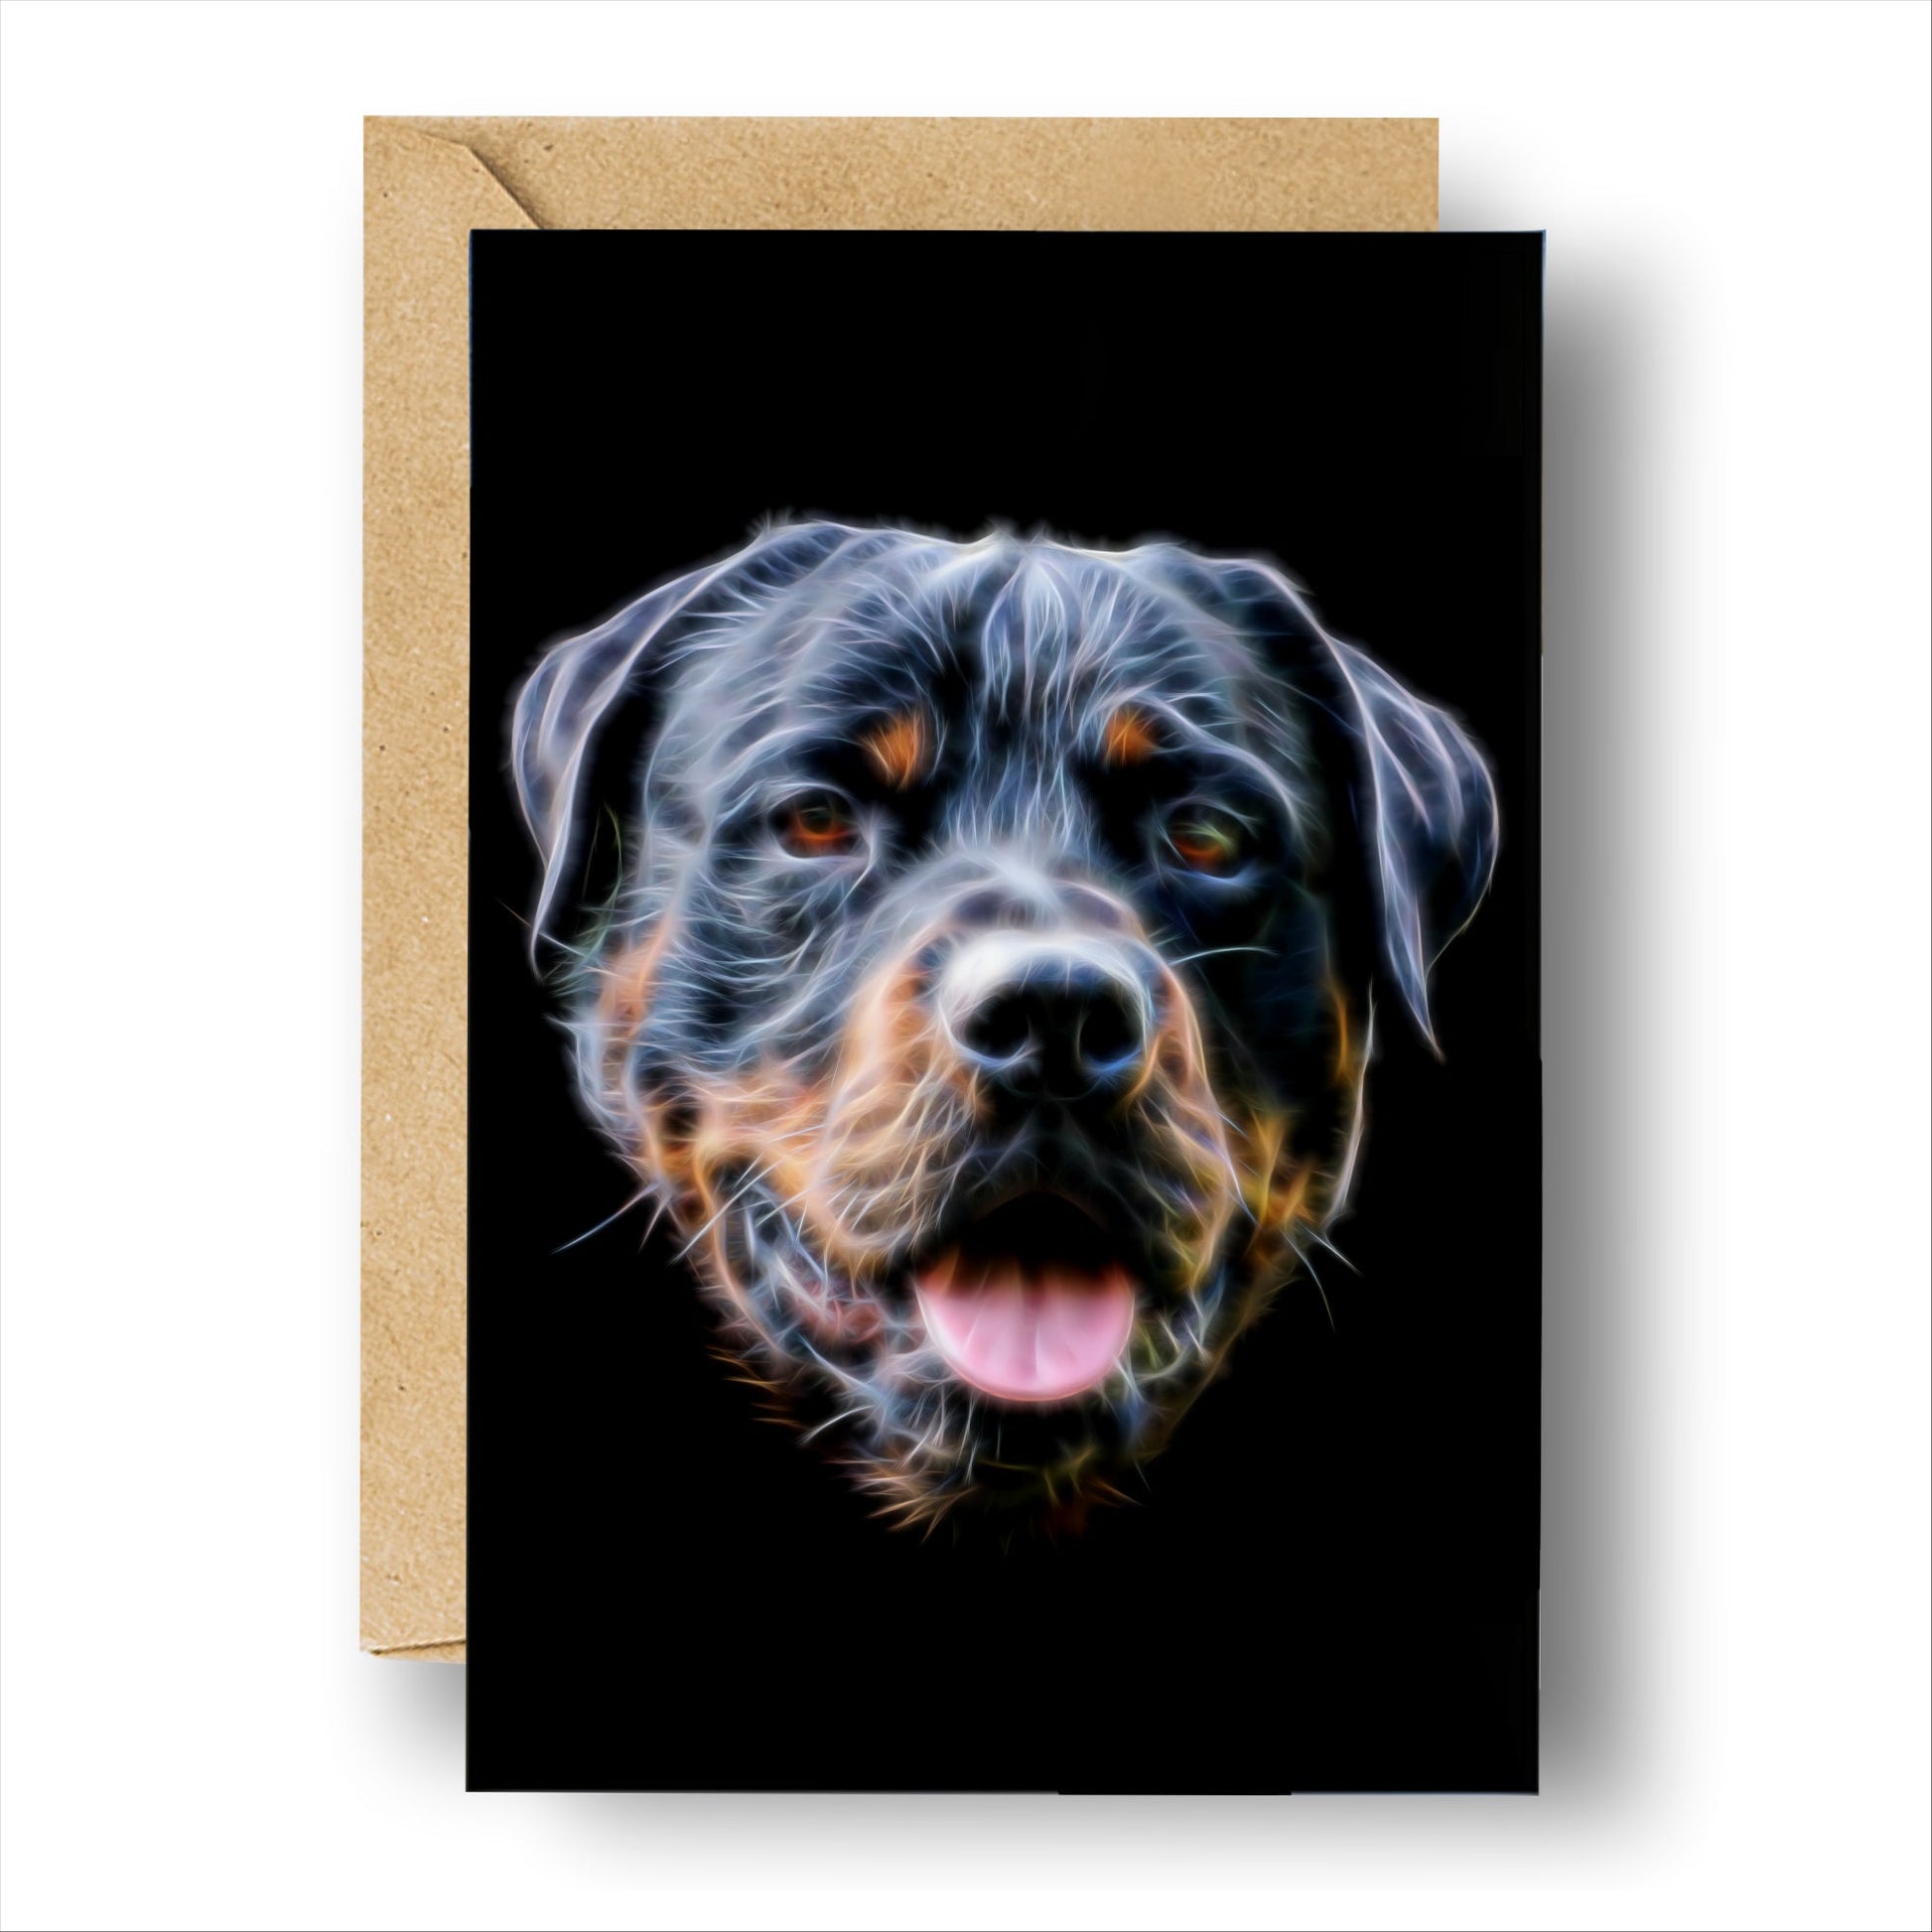 Rottweiler Greeting Card with Stunning Fractal Art Design. Blank Inside for Birthdays or any other Occasion